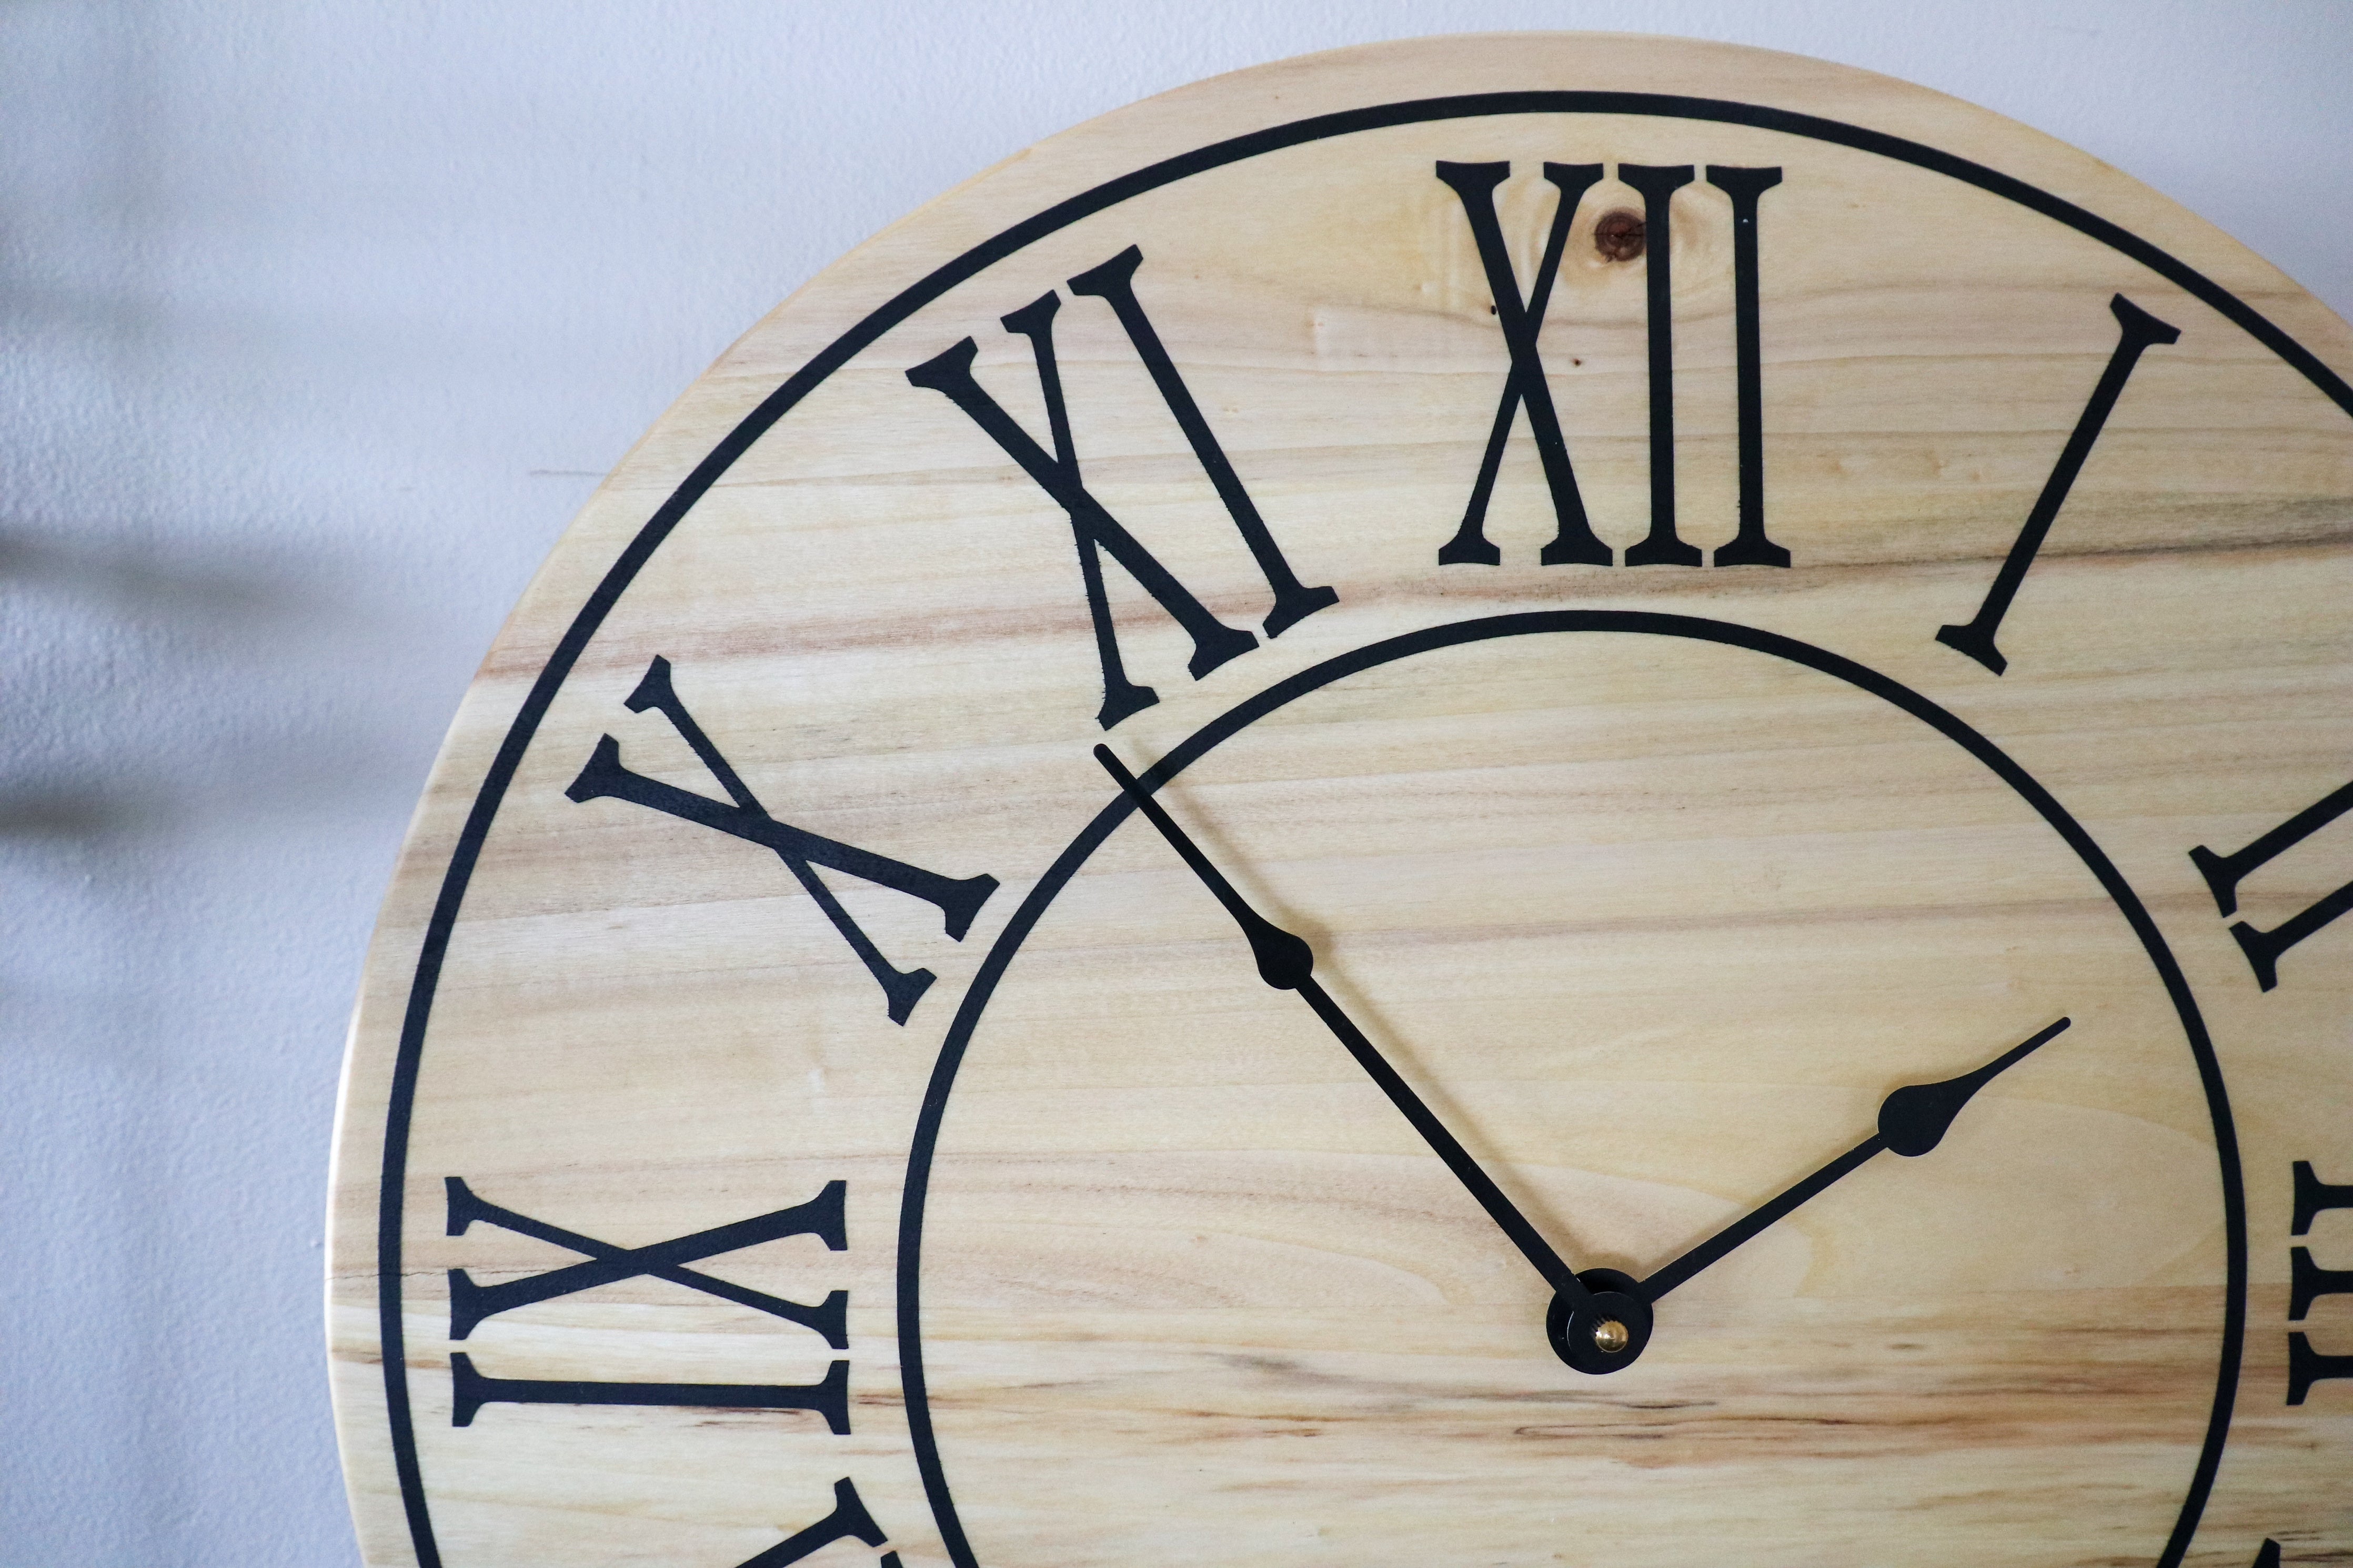 Soft Maple 18" Wood Clock with Black Roman Numerals (in stock)